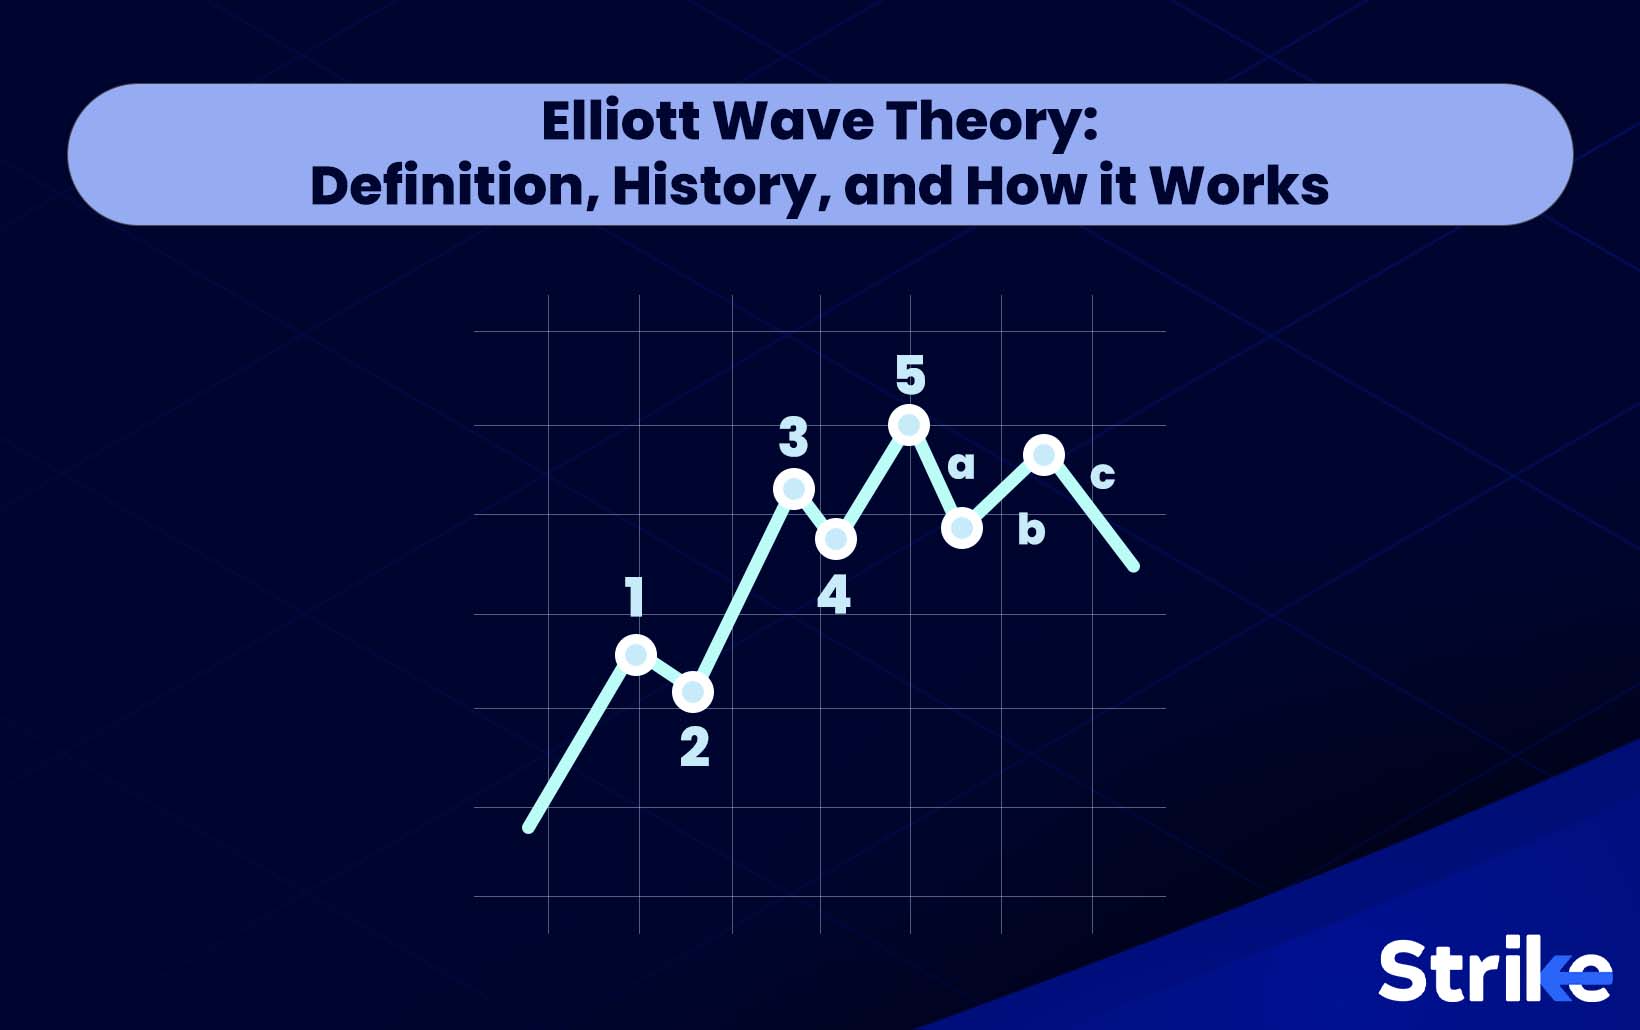 Elliott Wave Theory: Definition, History, and How it Works